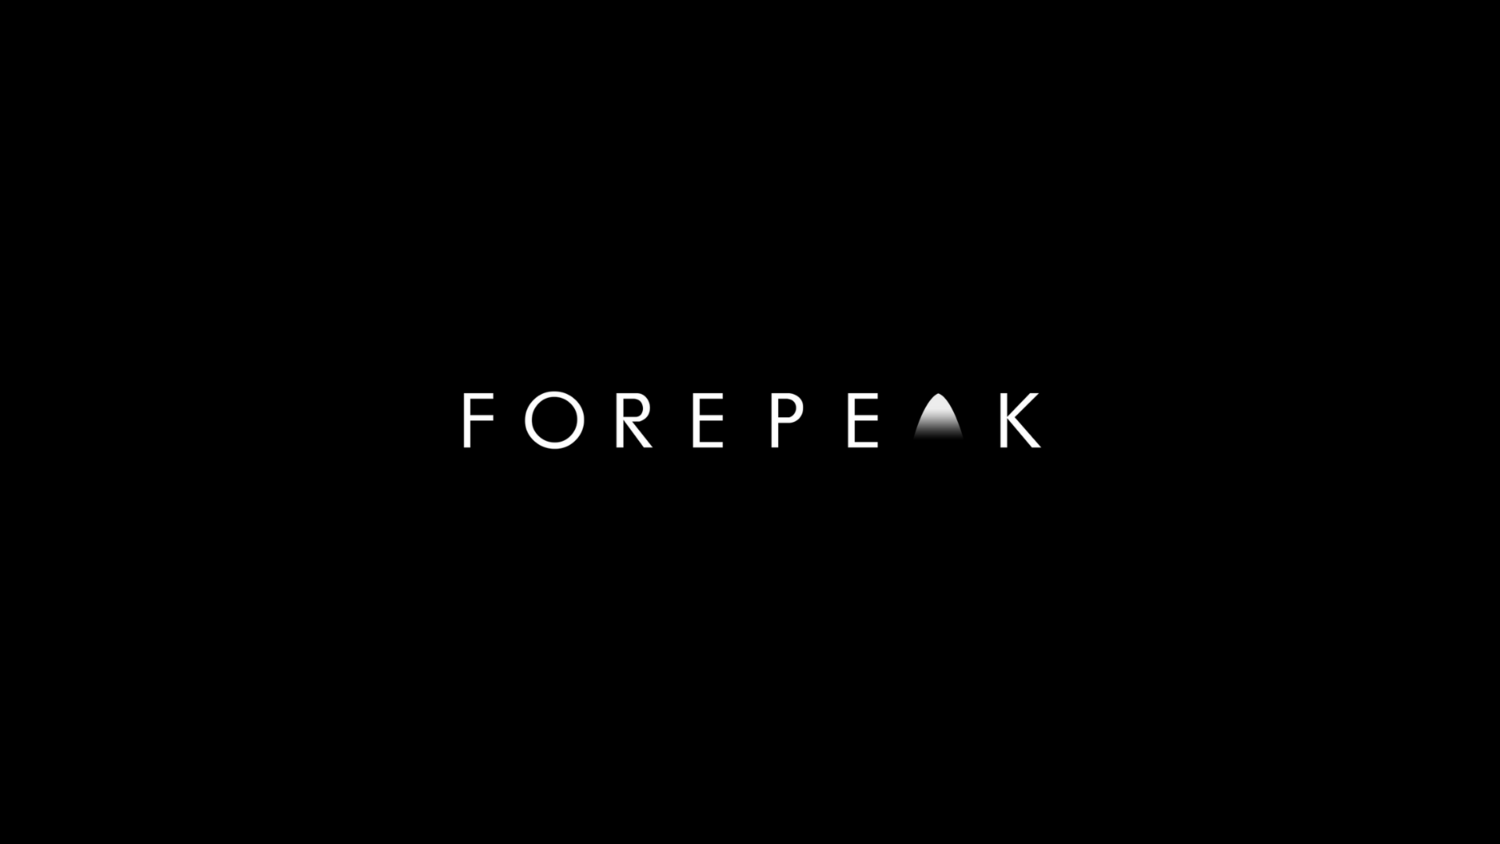 About Forepeak Video Production — Forepeak Video Production